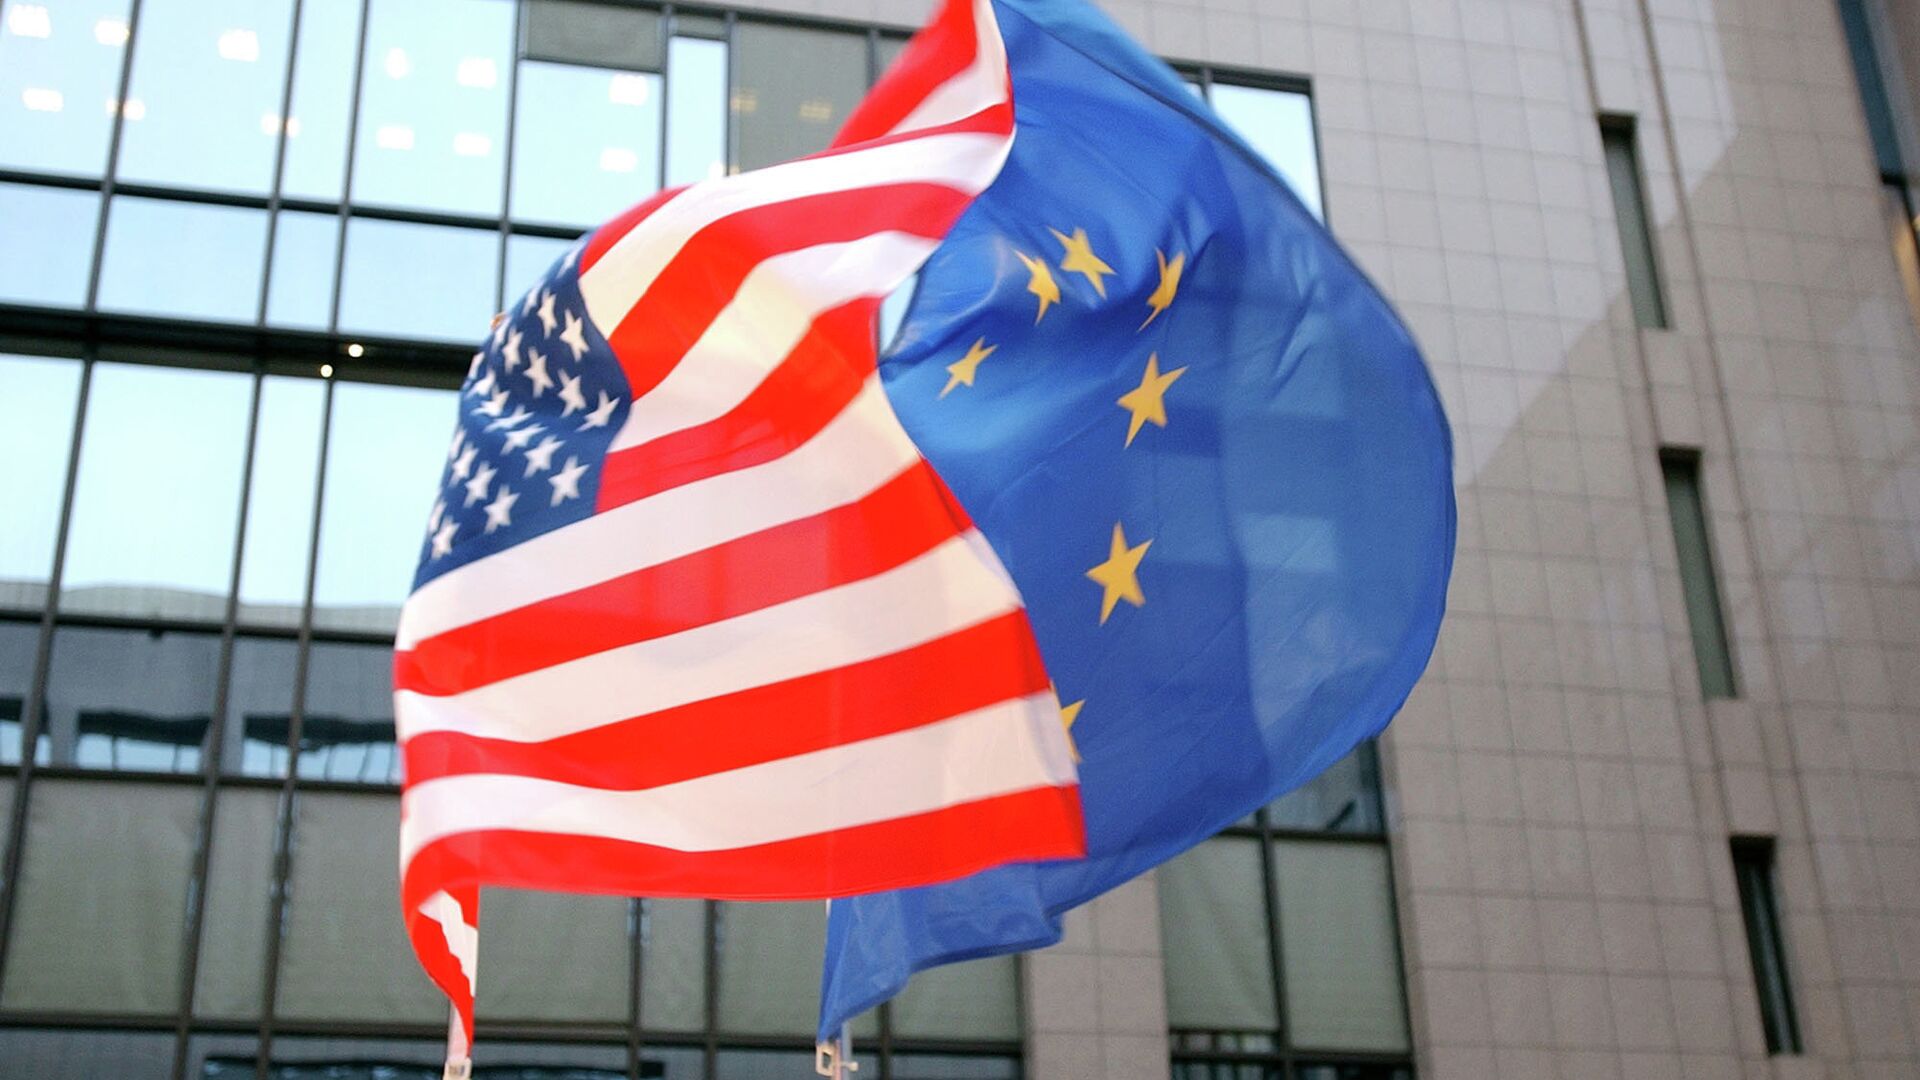 The US and EU flags, left and right, fly side by side at the European Council building in Brussels - Sputnik International, 1920, 11.11.2022